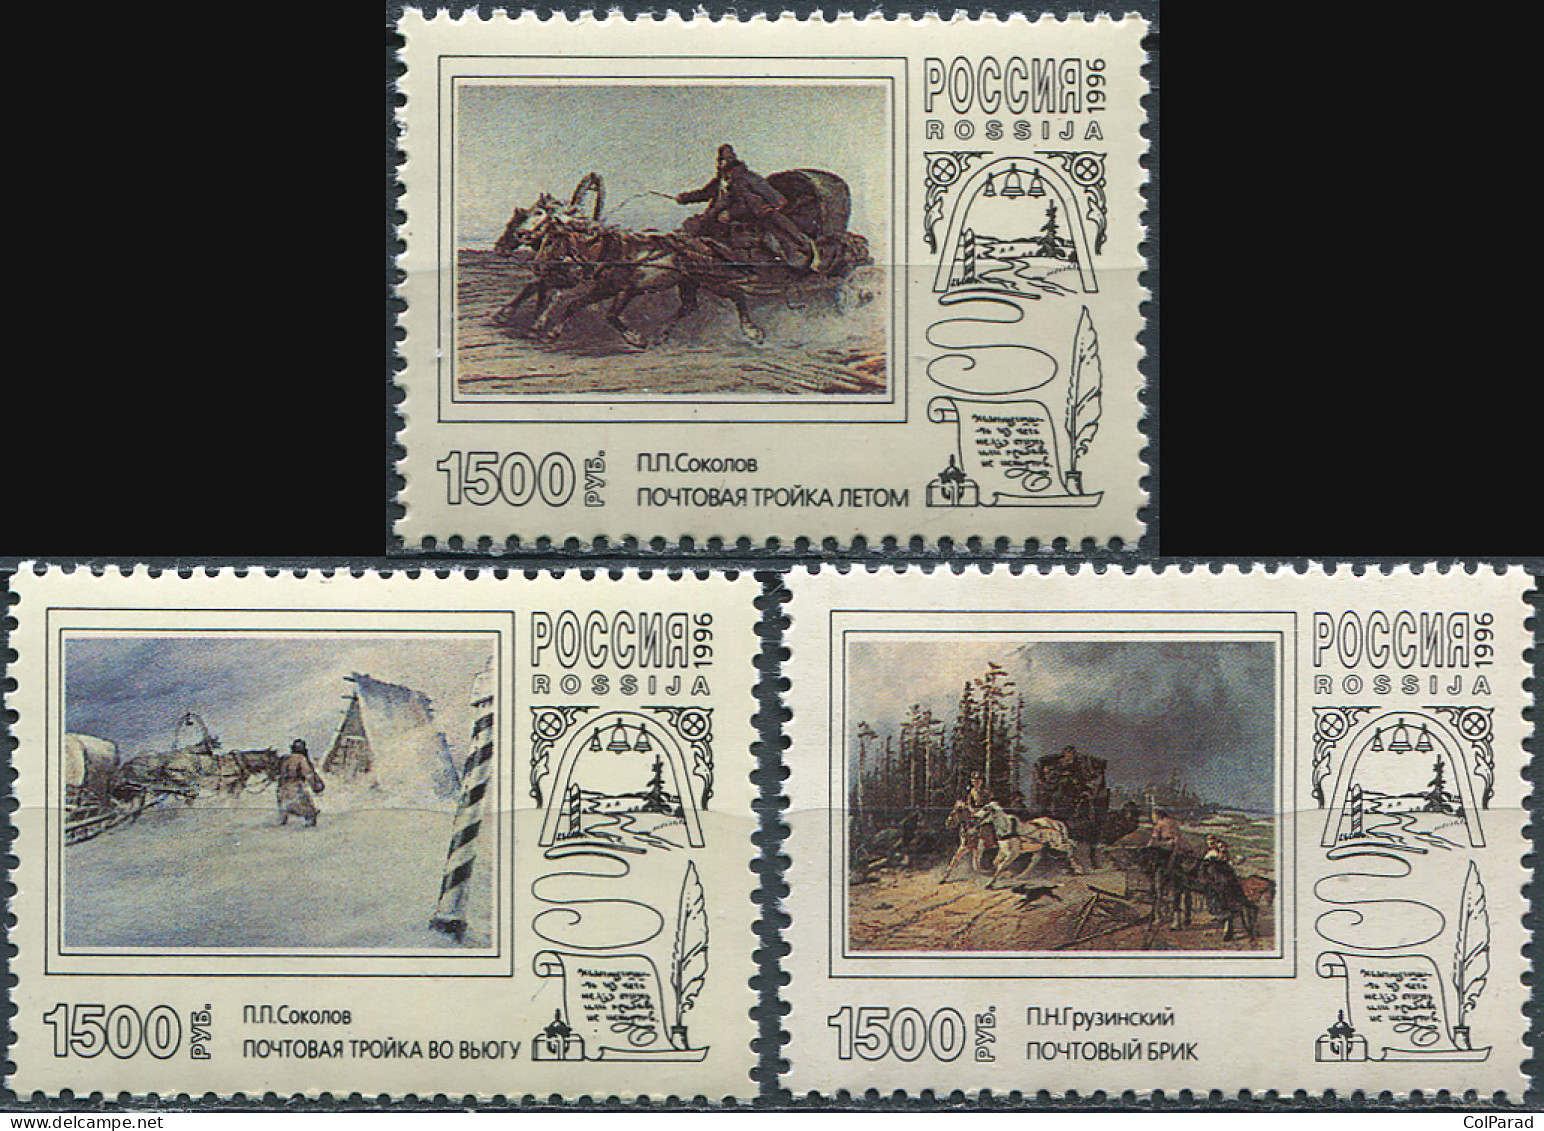 RUSSIA - 1996 - SET OF 3 STAMPS MNH ** - Postal Troikas In Paintings - Neufs